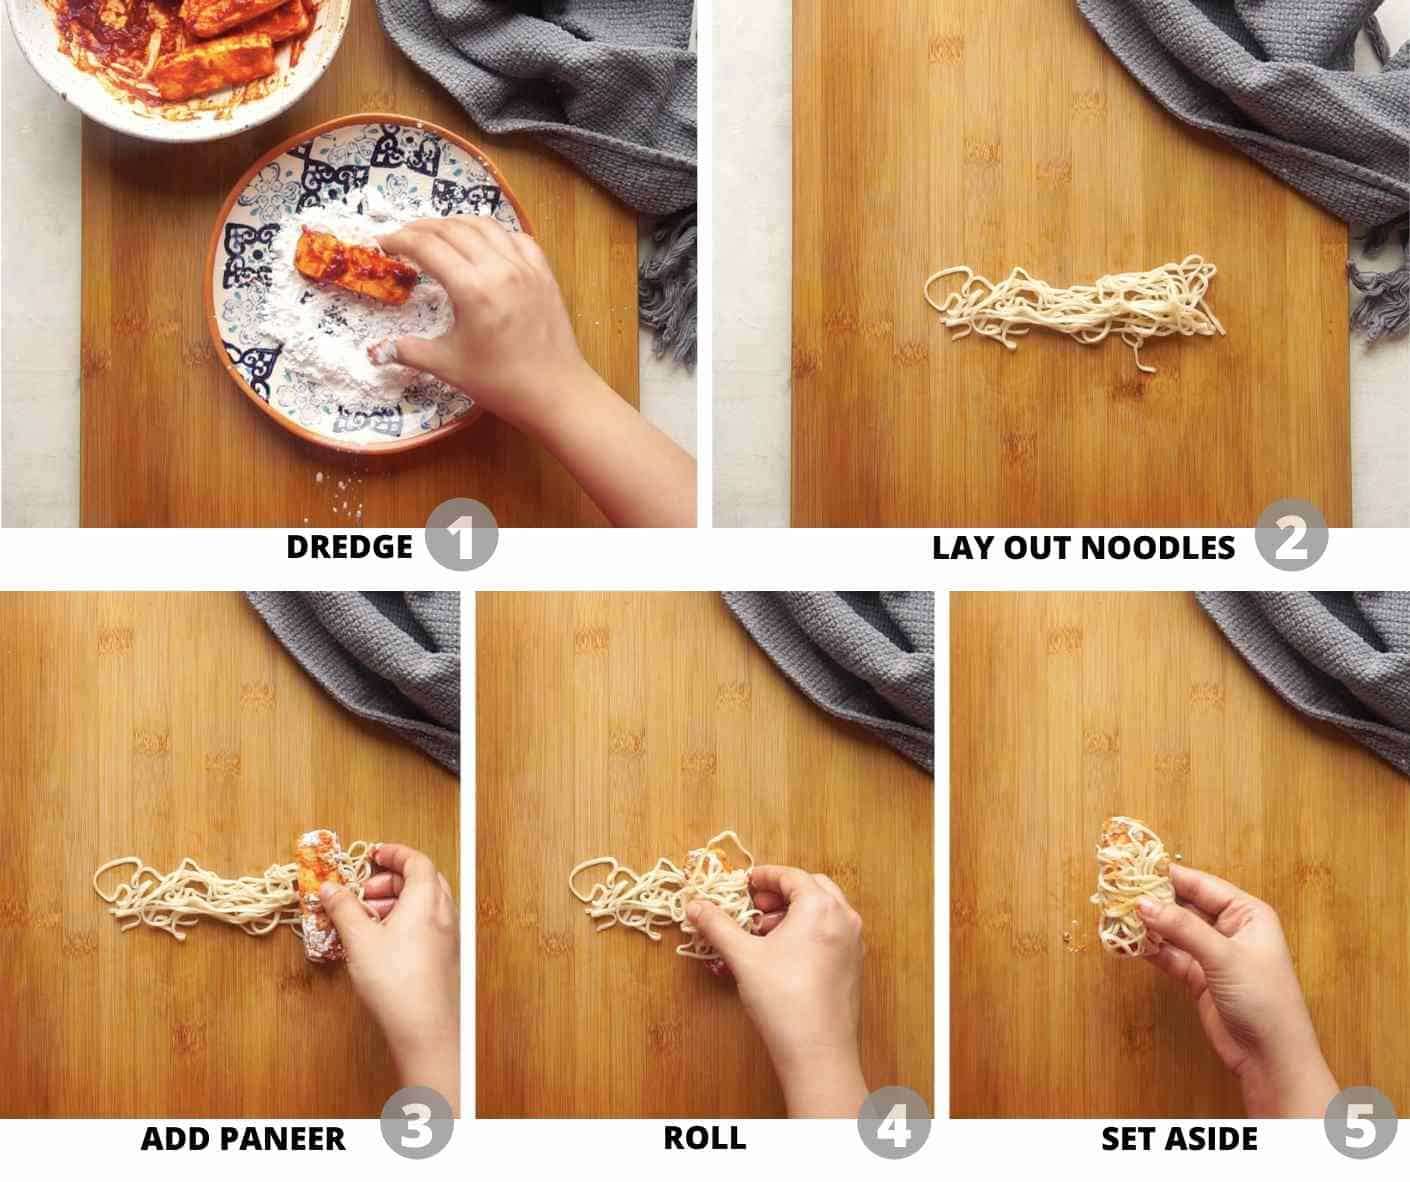 Step by step pictures showing how to assemble thread paneer